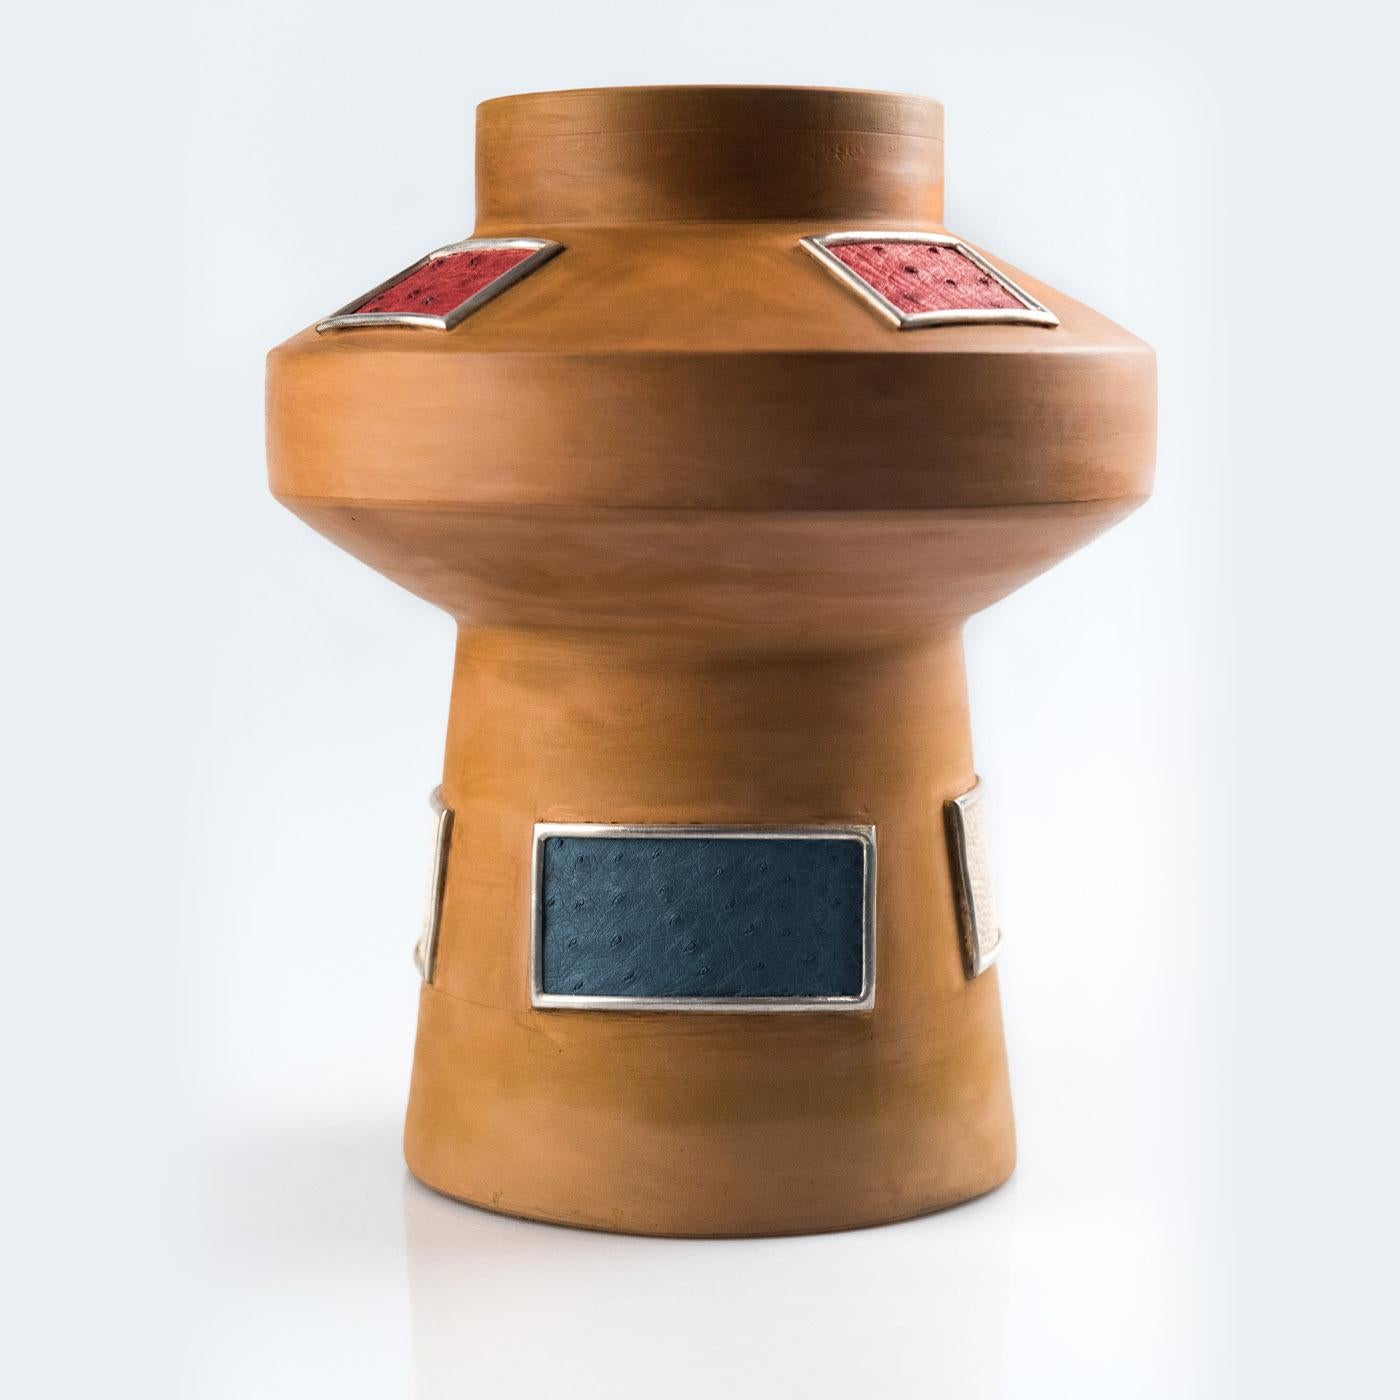 An extraordinary artwork that displays deft craftsmanship and unprecedented style, this gorgeous vase features a singular and imposing silhouette that will make a statement in any interior decor. It is handmade of earthenware finished with beeswax